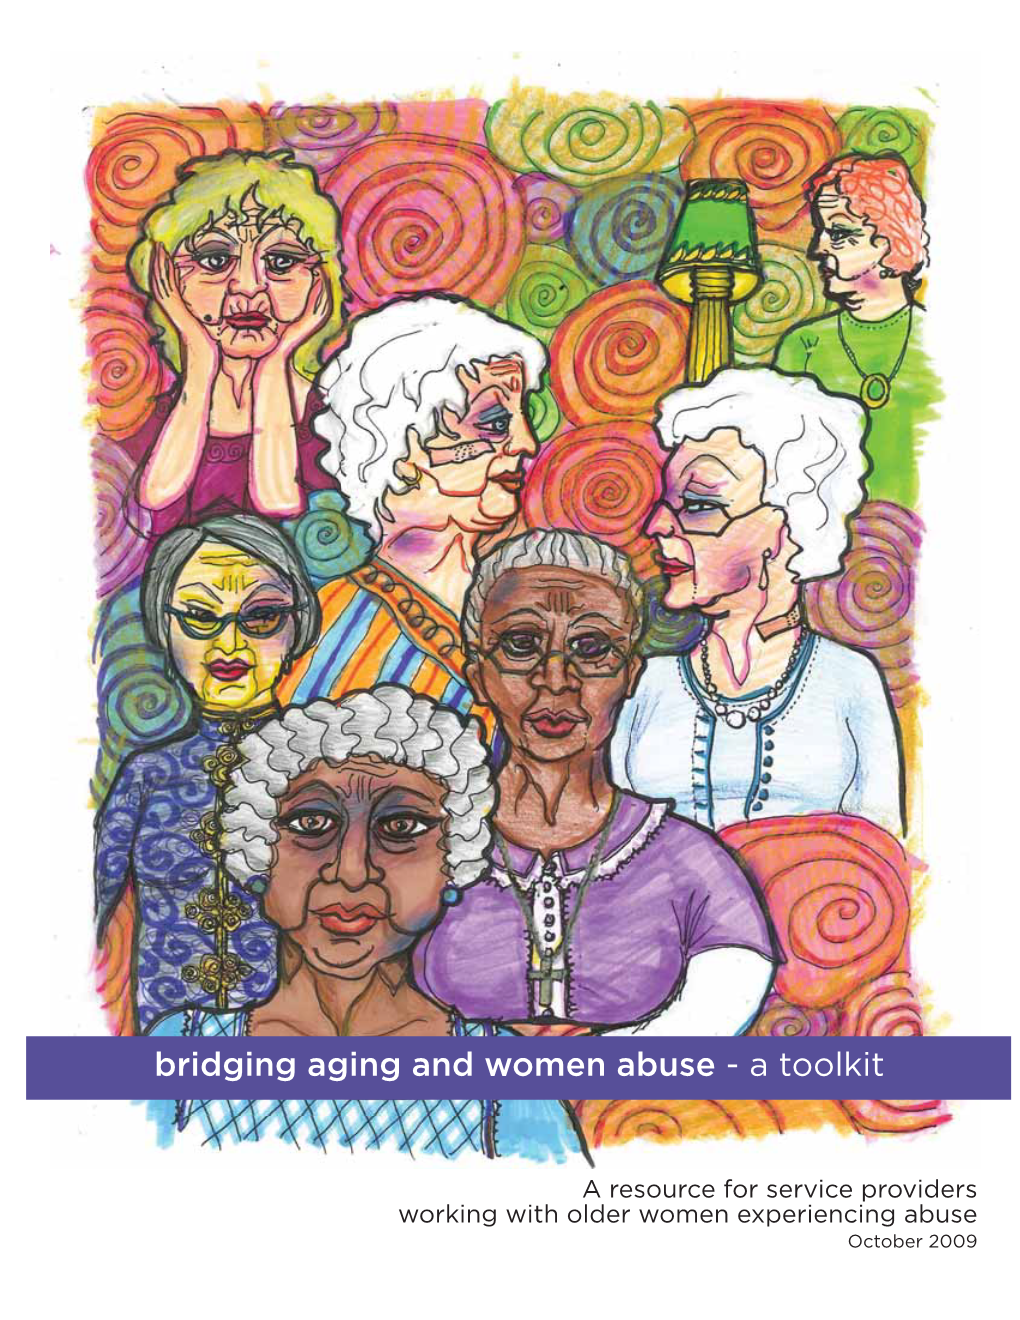 Bridging Aging and Women Abuse - a Toolkit